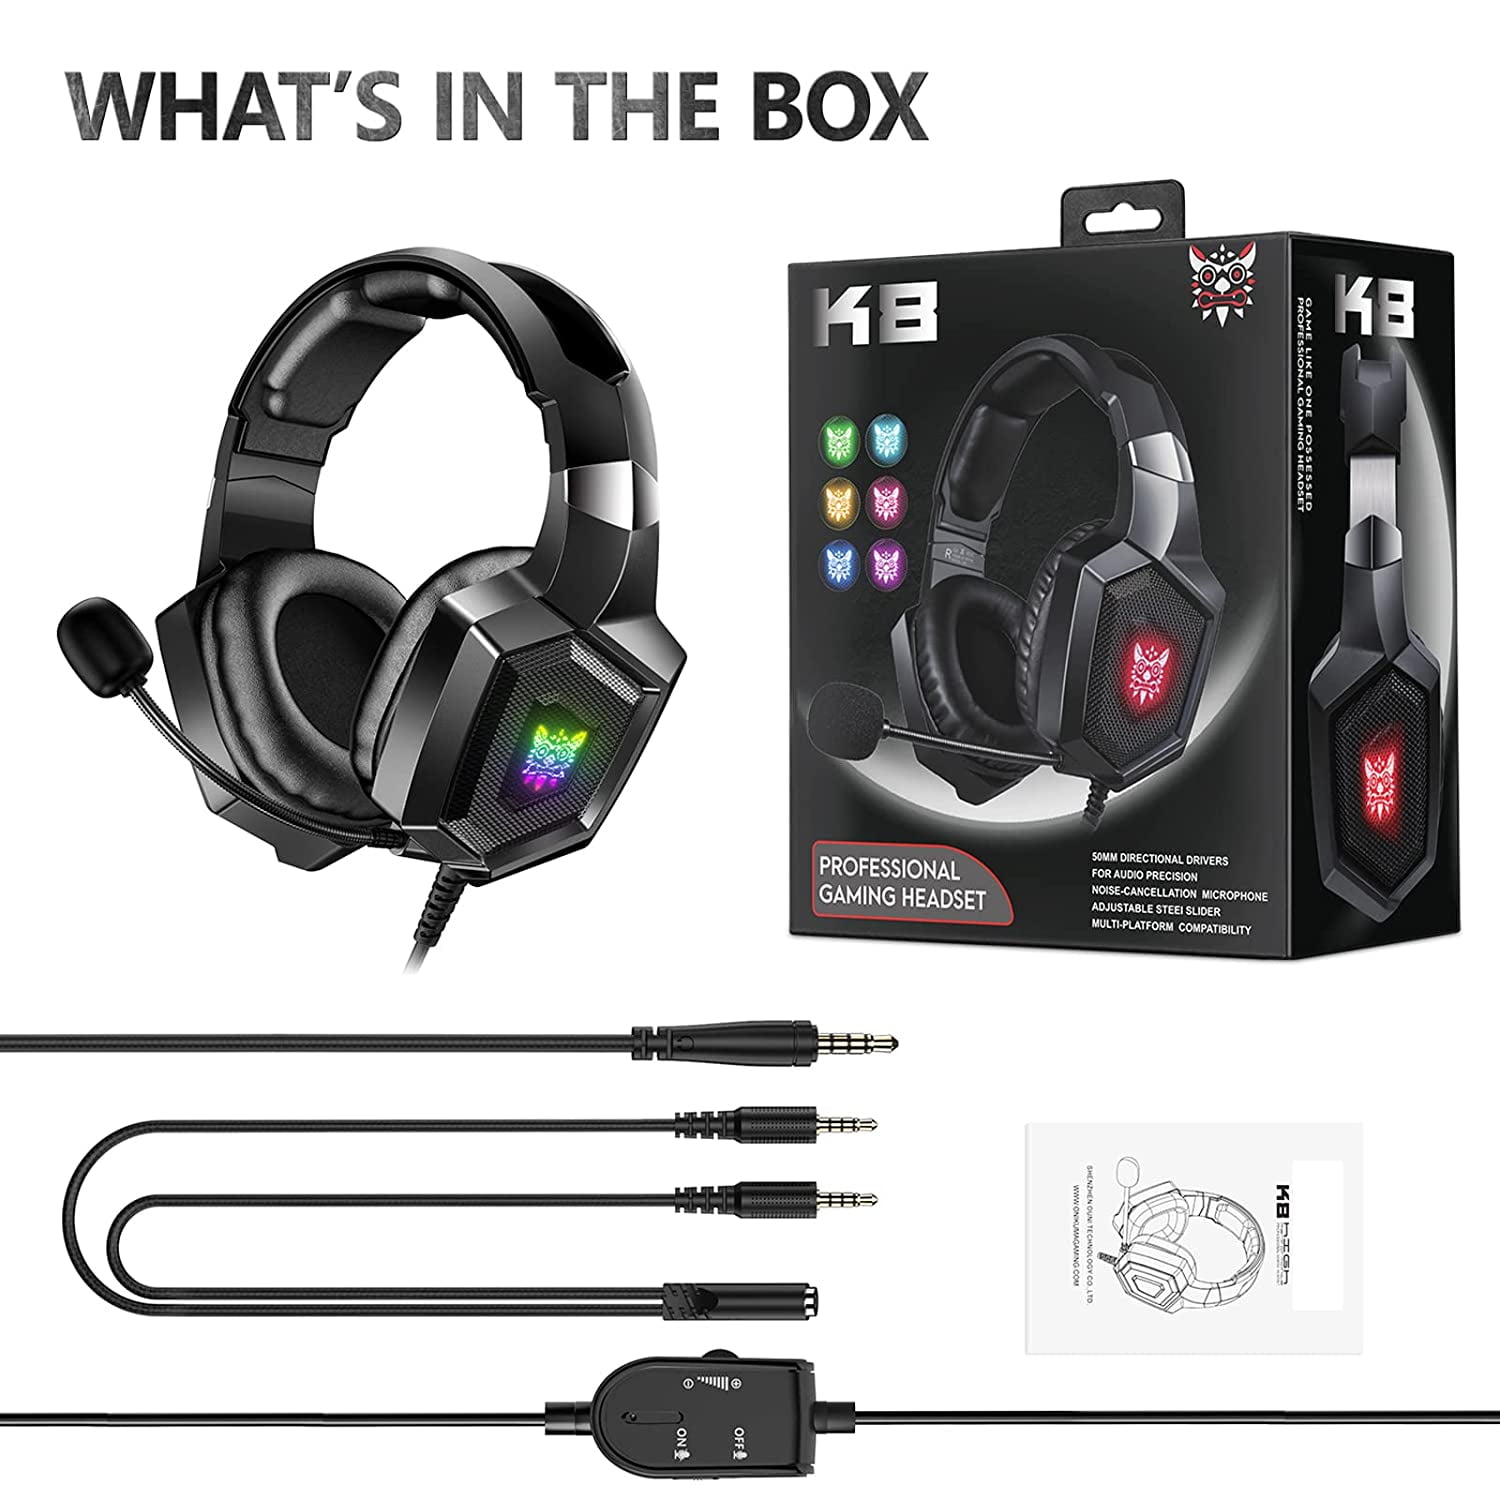 RUNMUS K8 Gaming Headset for Xbox One, PS4 Headset with Surround Sound,  Over Ear Headphones with Noise Canceling Mic & RGB Light, Compatible with